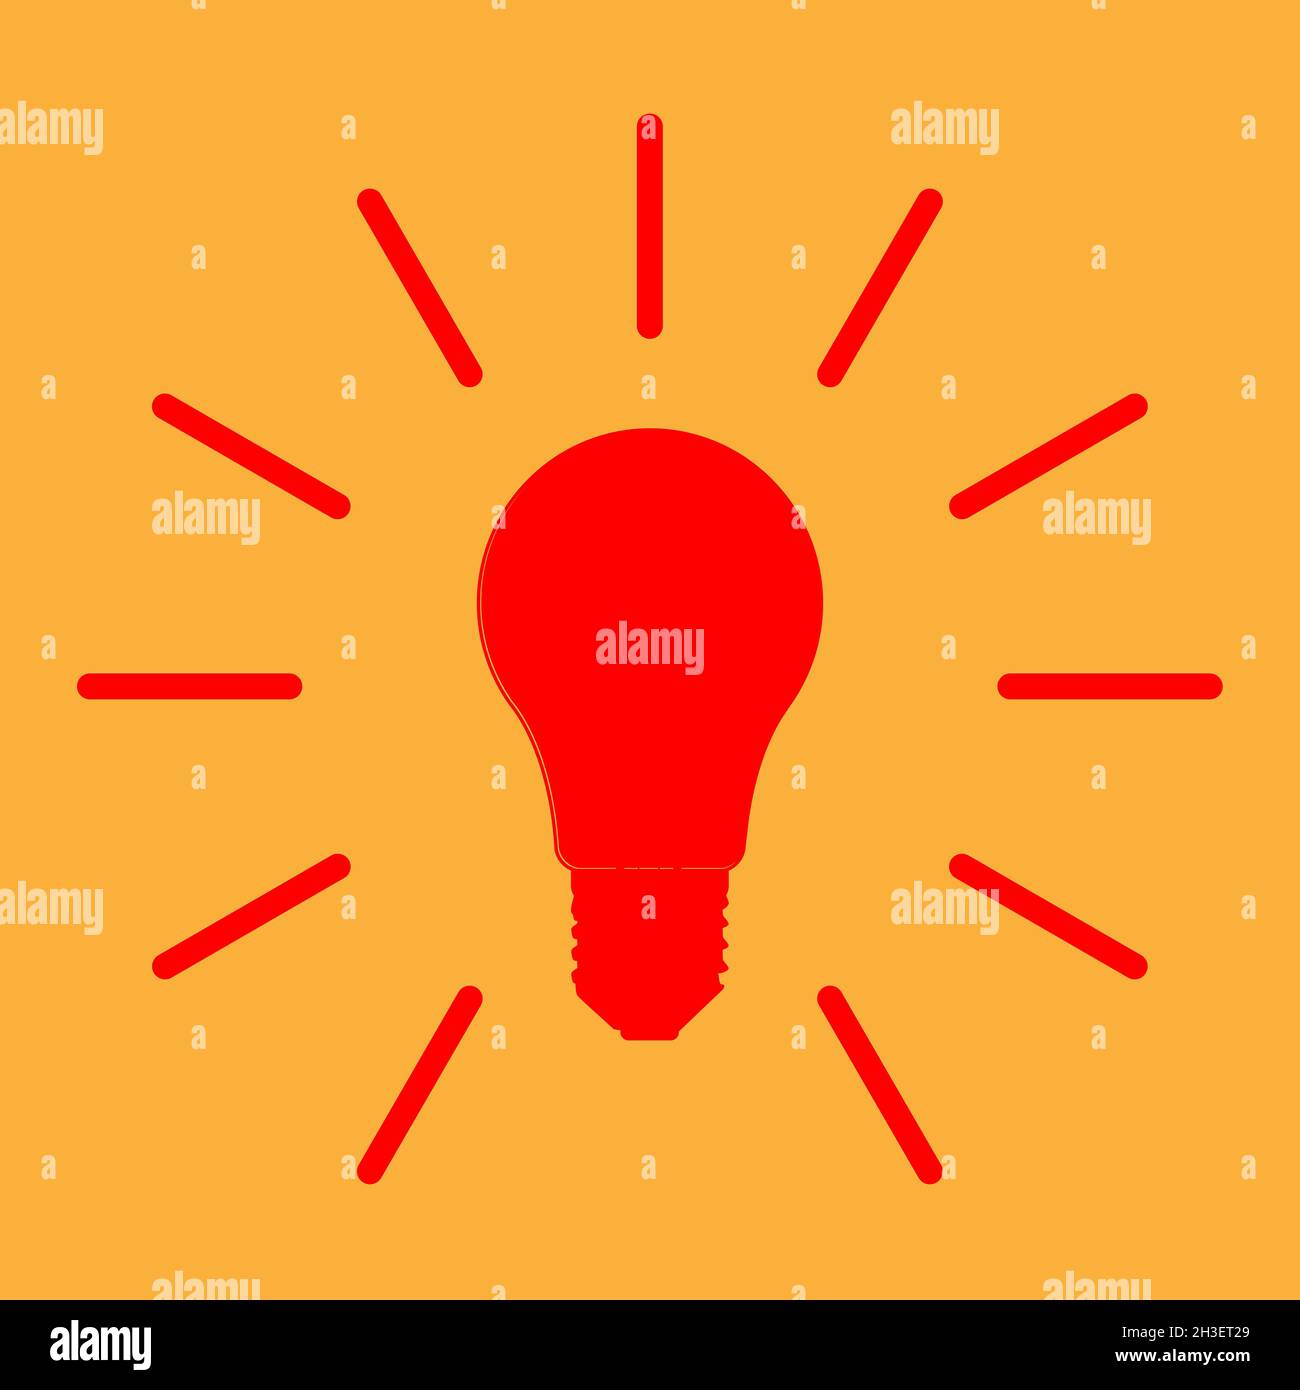 A typical standard light bulb shape in red over an orange background Stock Photo